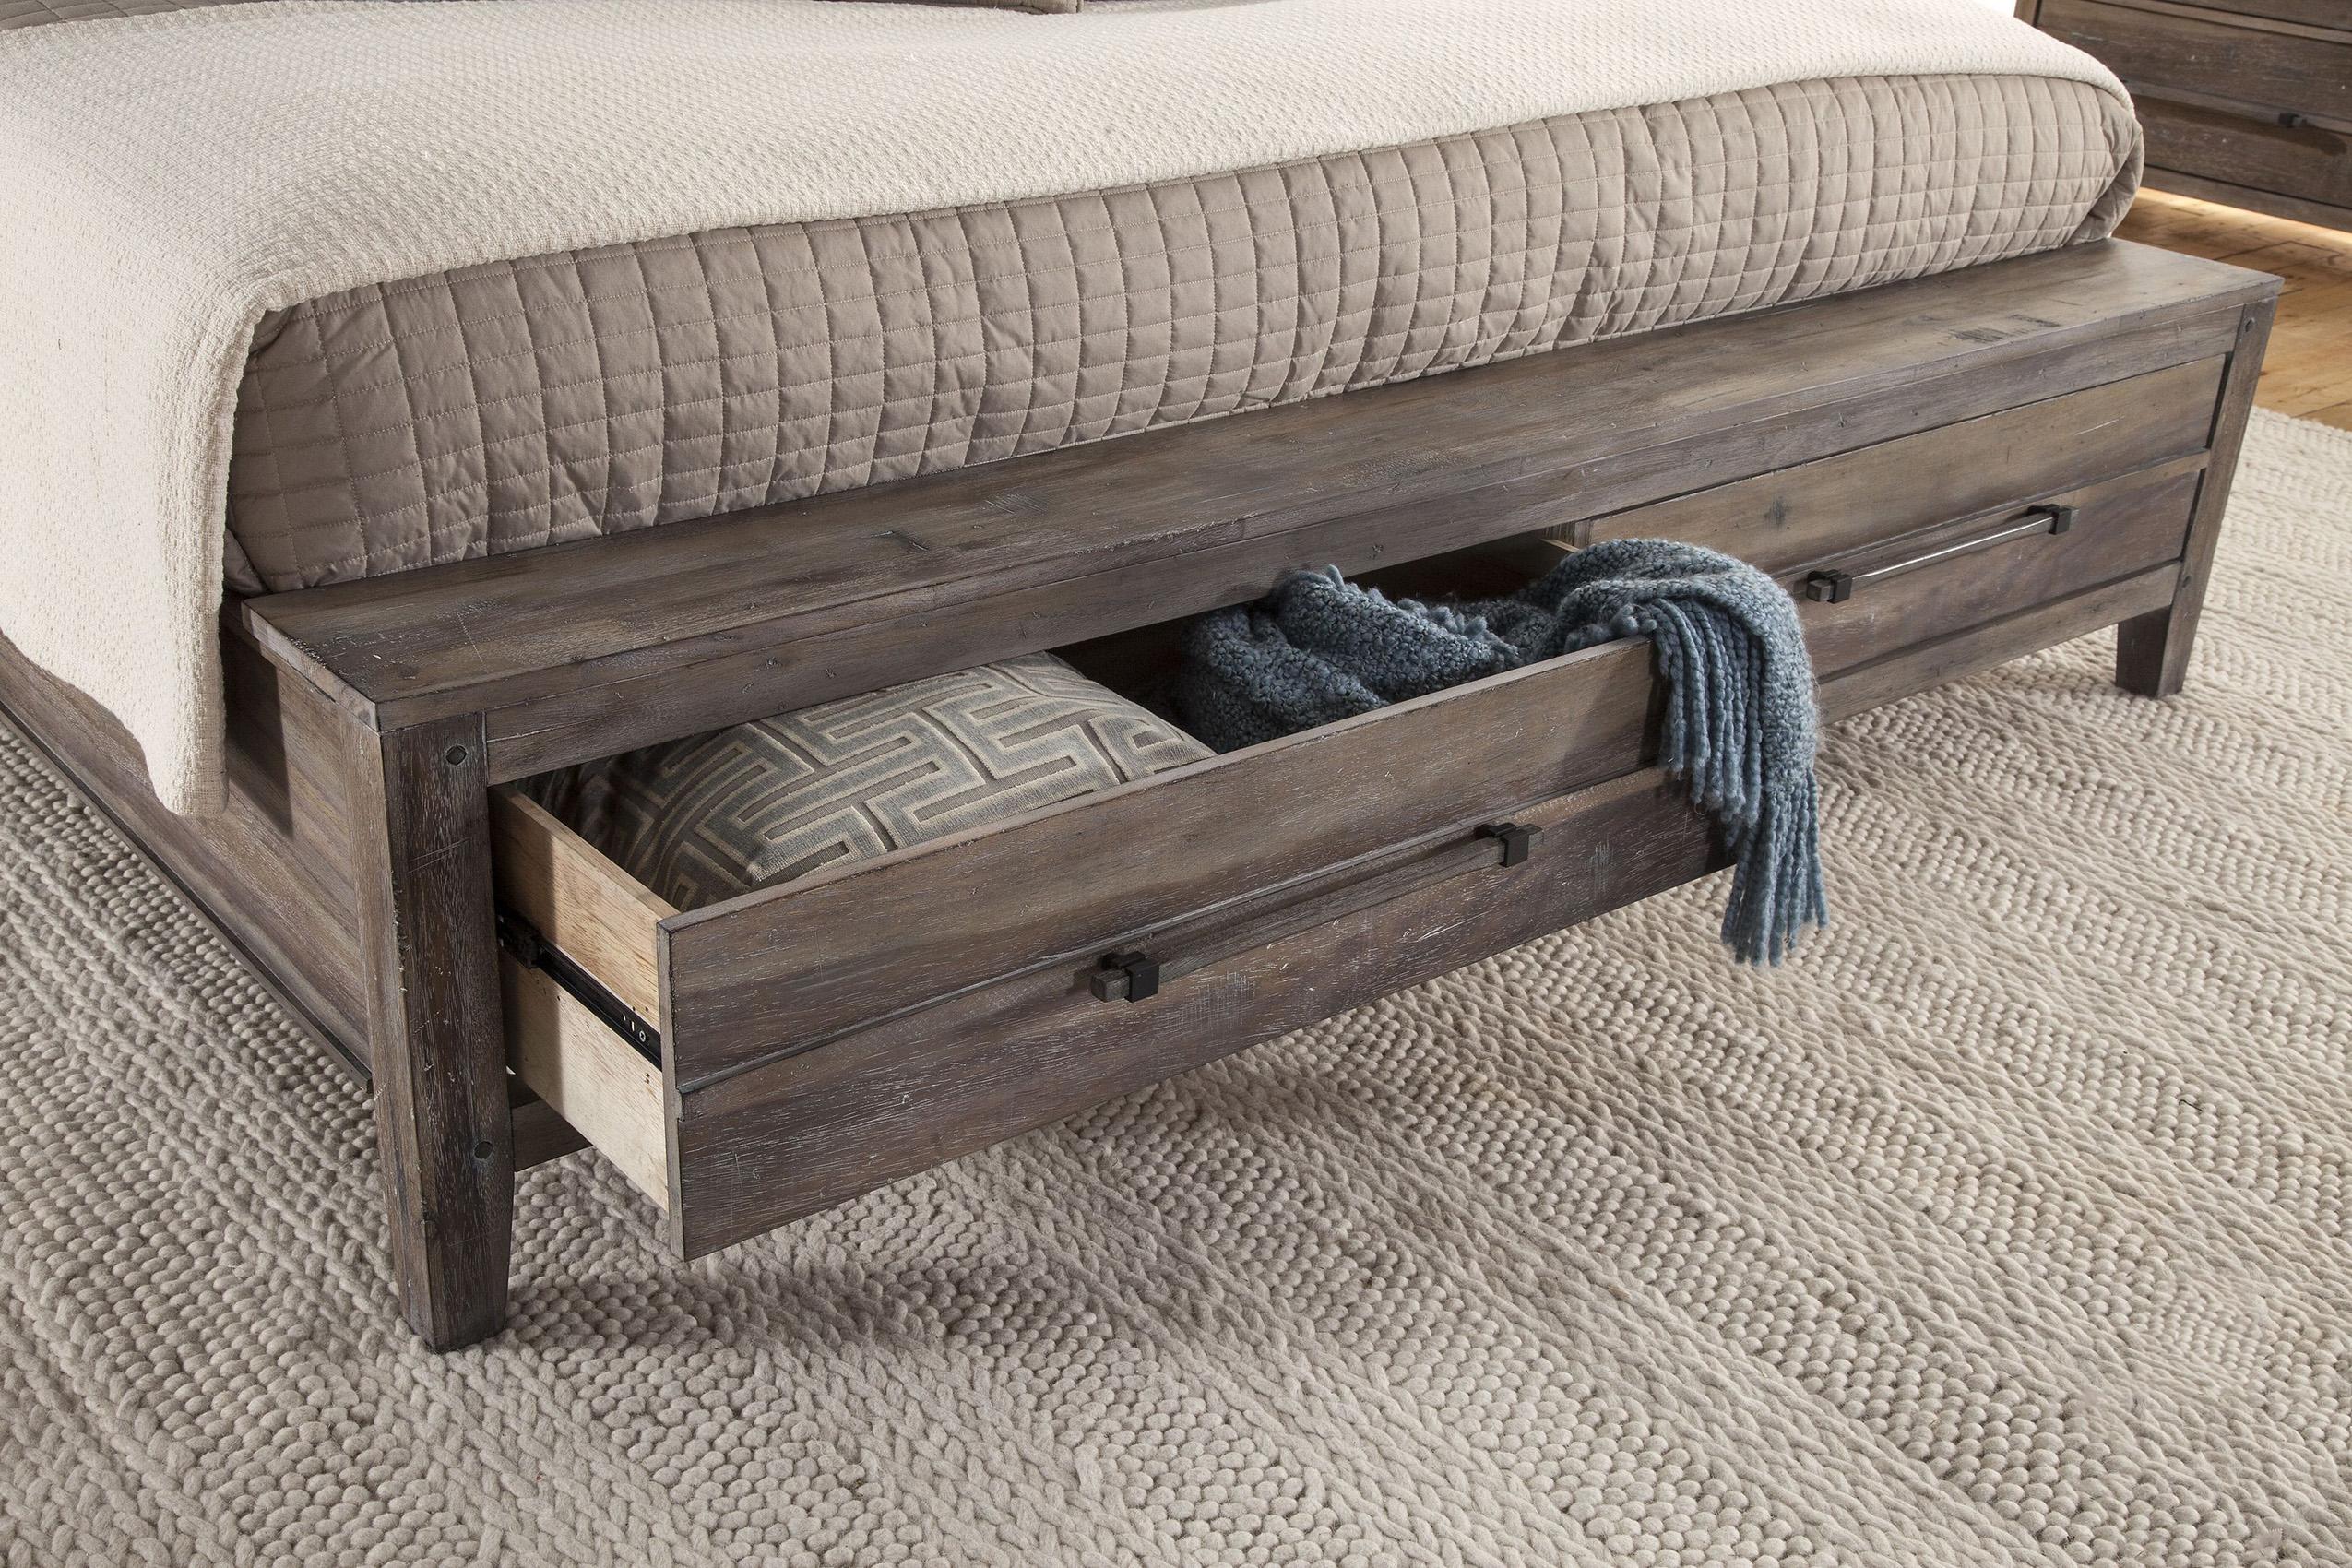 

    
American Woodcrafters AURORA 2800-50SLES Sleigh Bed Driftwood/Gray 2800-66SLST
